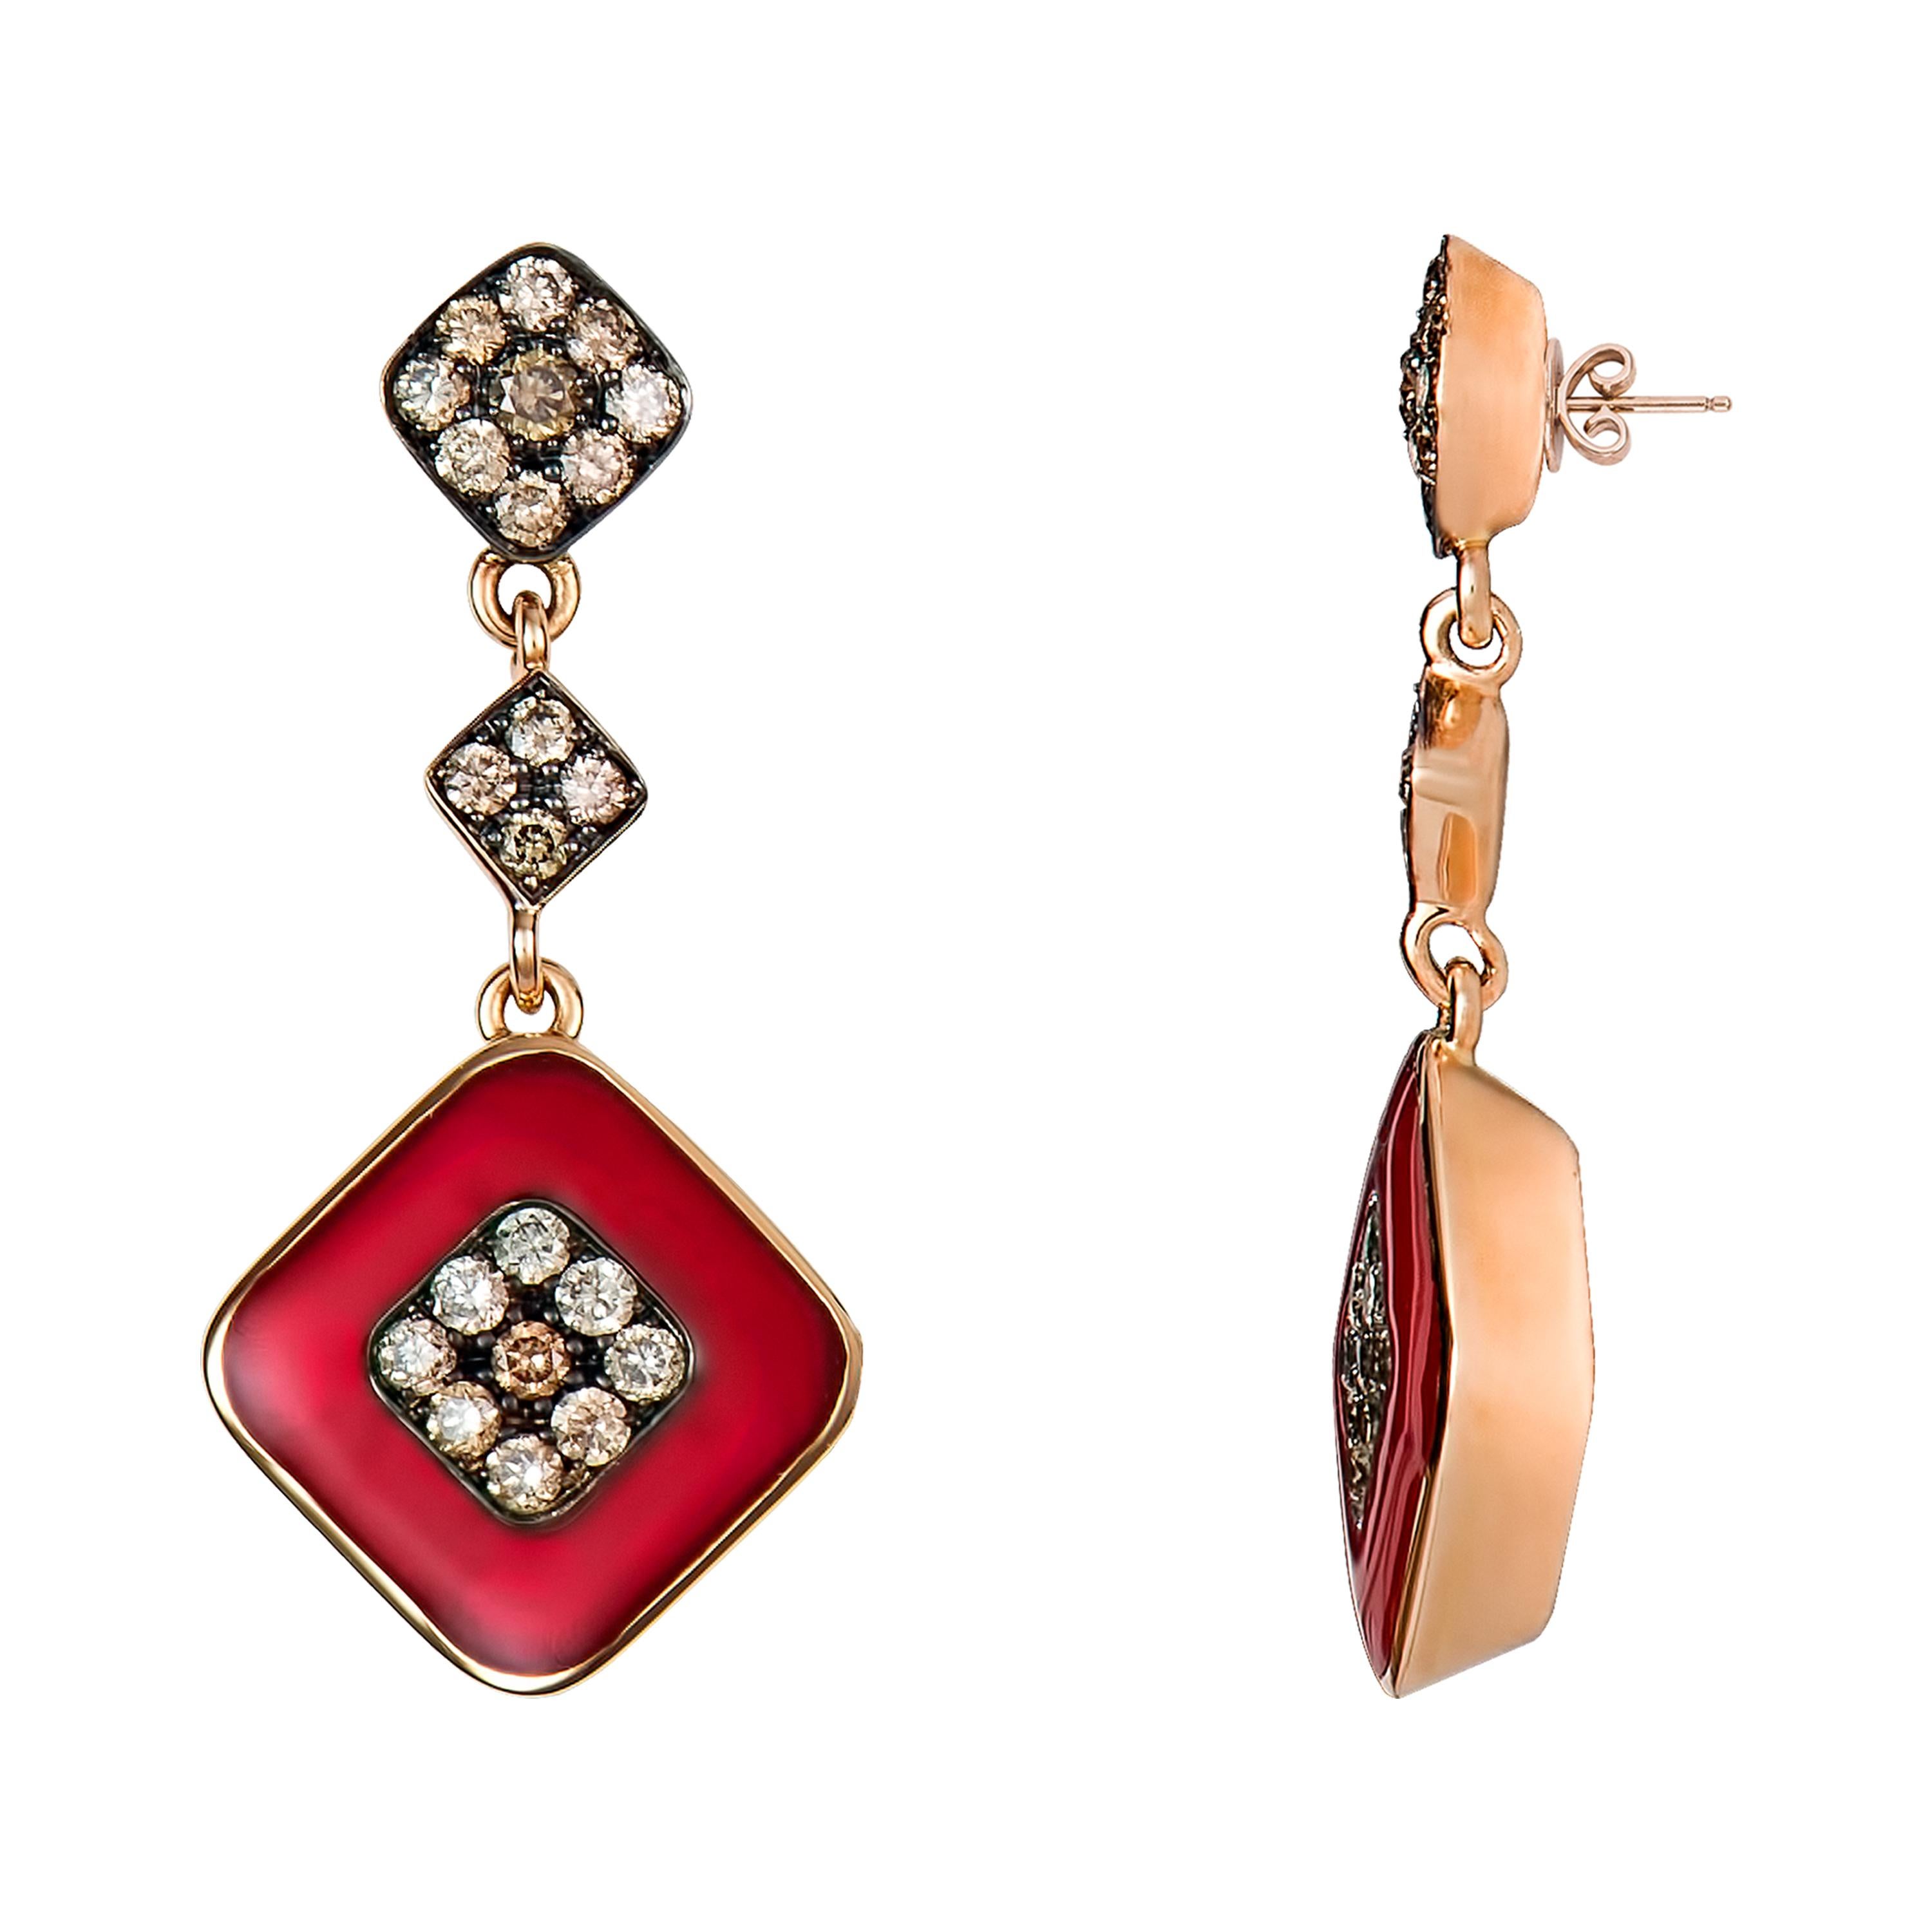 Expertly  handcrafted by Molu this simple yet elegant 18k rose gold dangle earrings are a perfect fit for summer days with its vibrant red colored enamel complete with brown diamonds in the center. 

Brown Diamonds: 0.50 carats